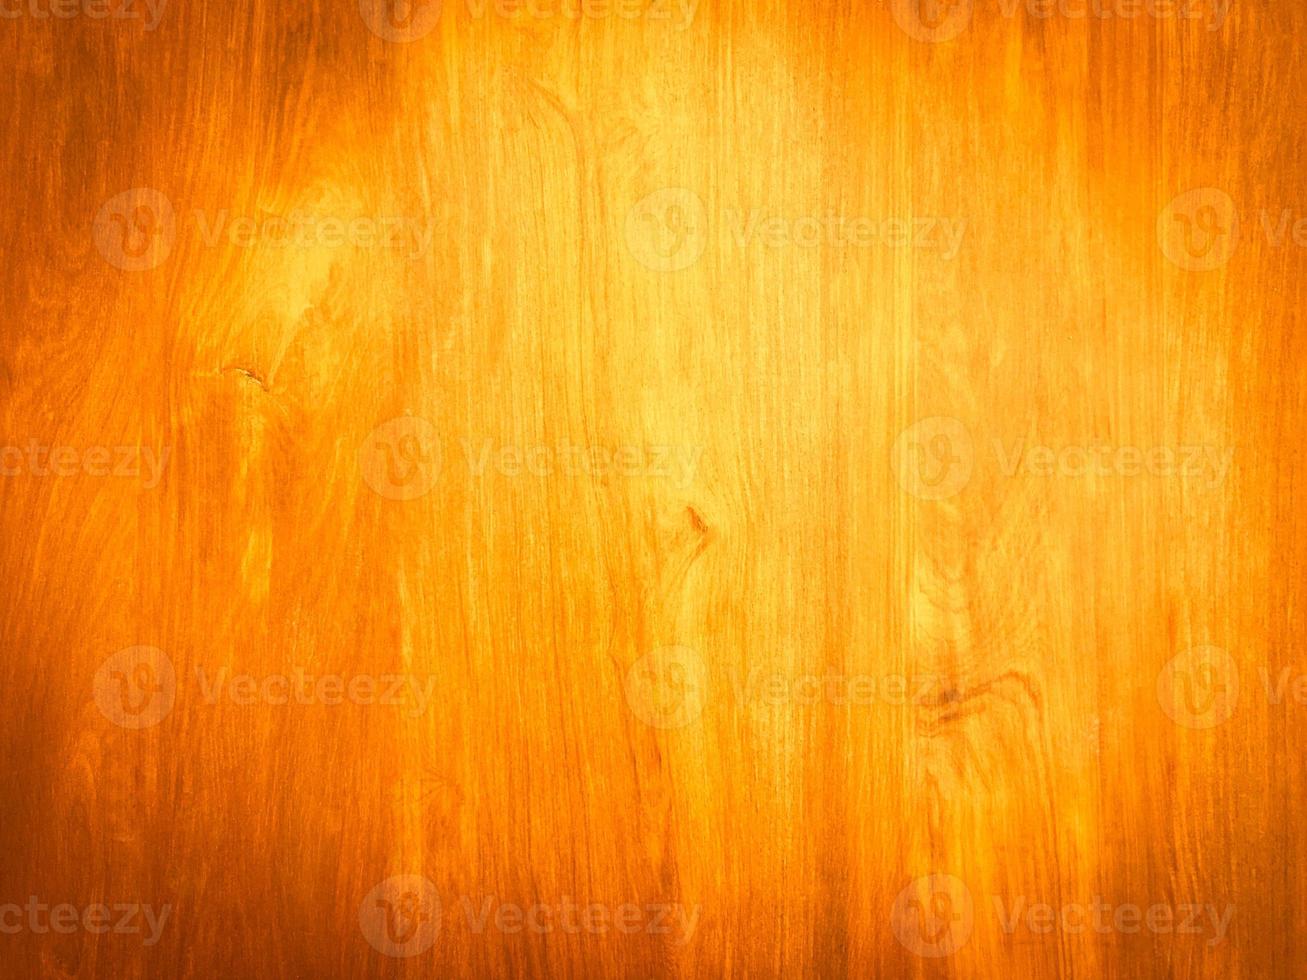 Smooth wood texture use as natural background with copy space for design or work photo